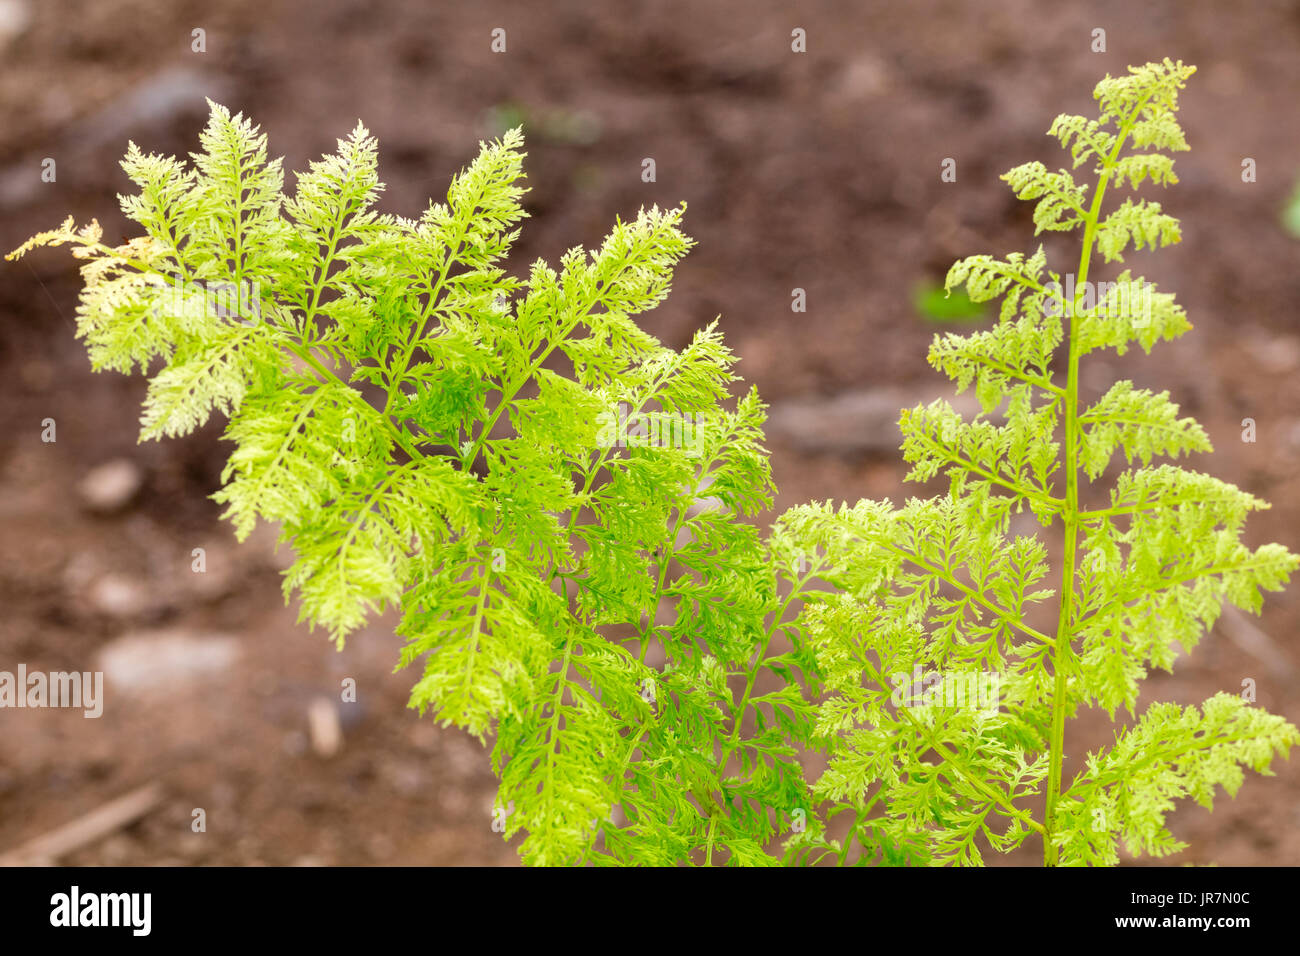 Finely divide frond of the laciest variety of the lady fern, Athyrium filis-femina 'Plumosum Druery' Stock Photo